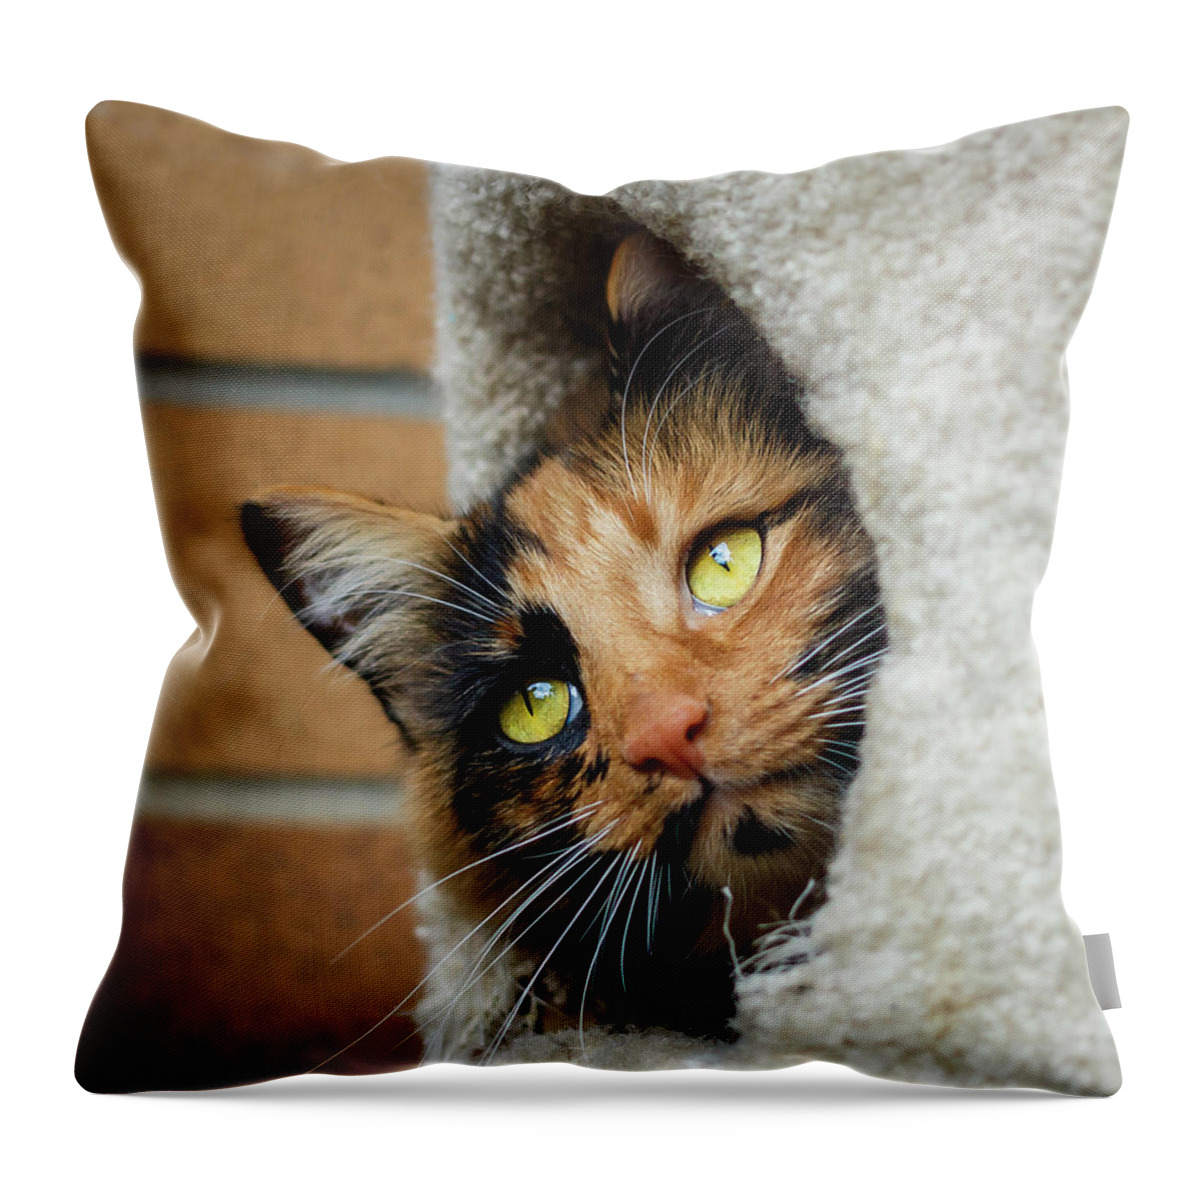 Art Throw Pillow featuring the photograph Peeping Tom Cat by Rick Deacon